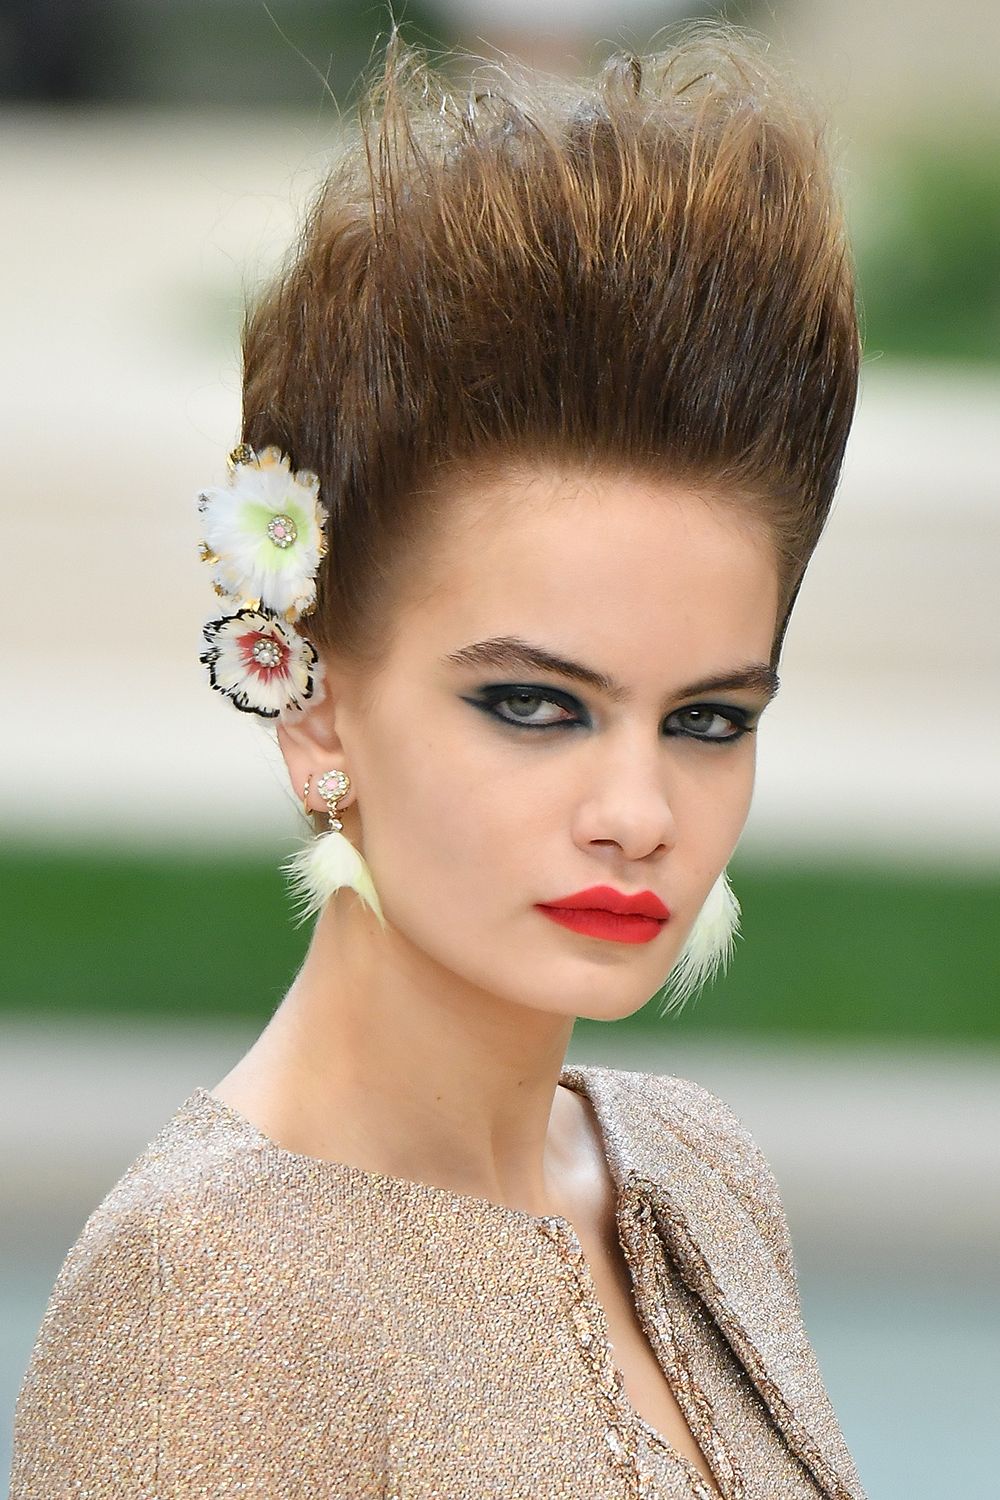 Chanel couture cements the return of bold make-up - Chanel couture